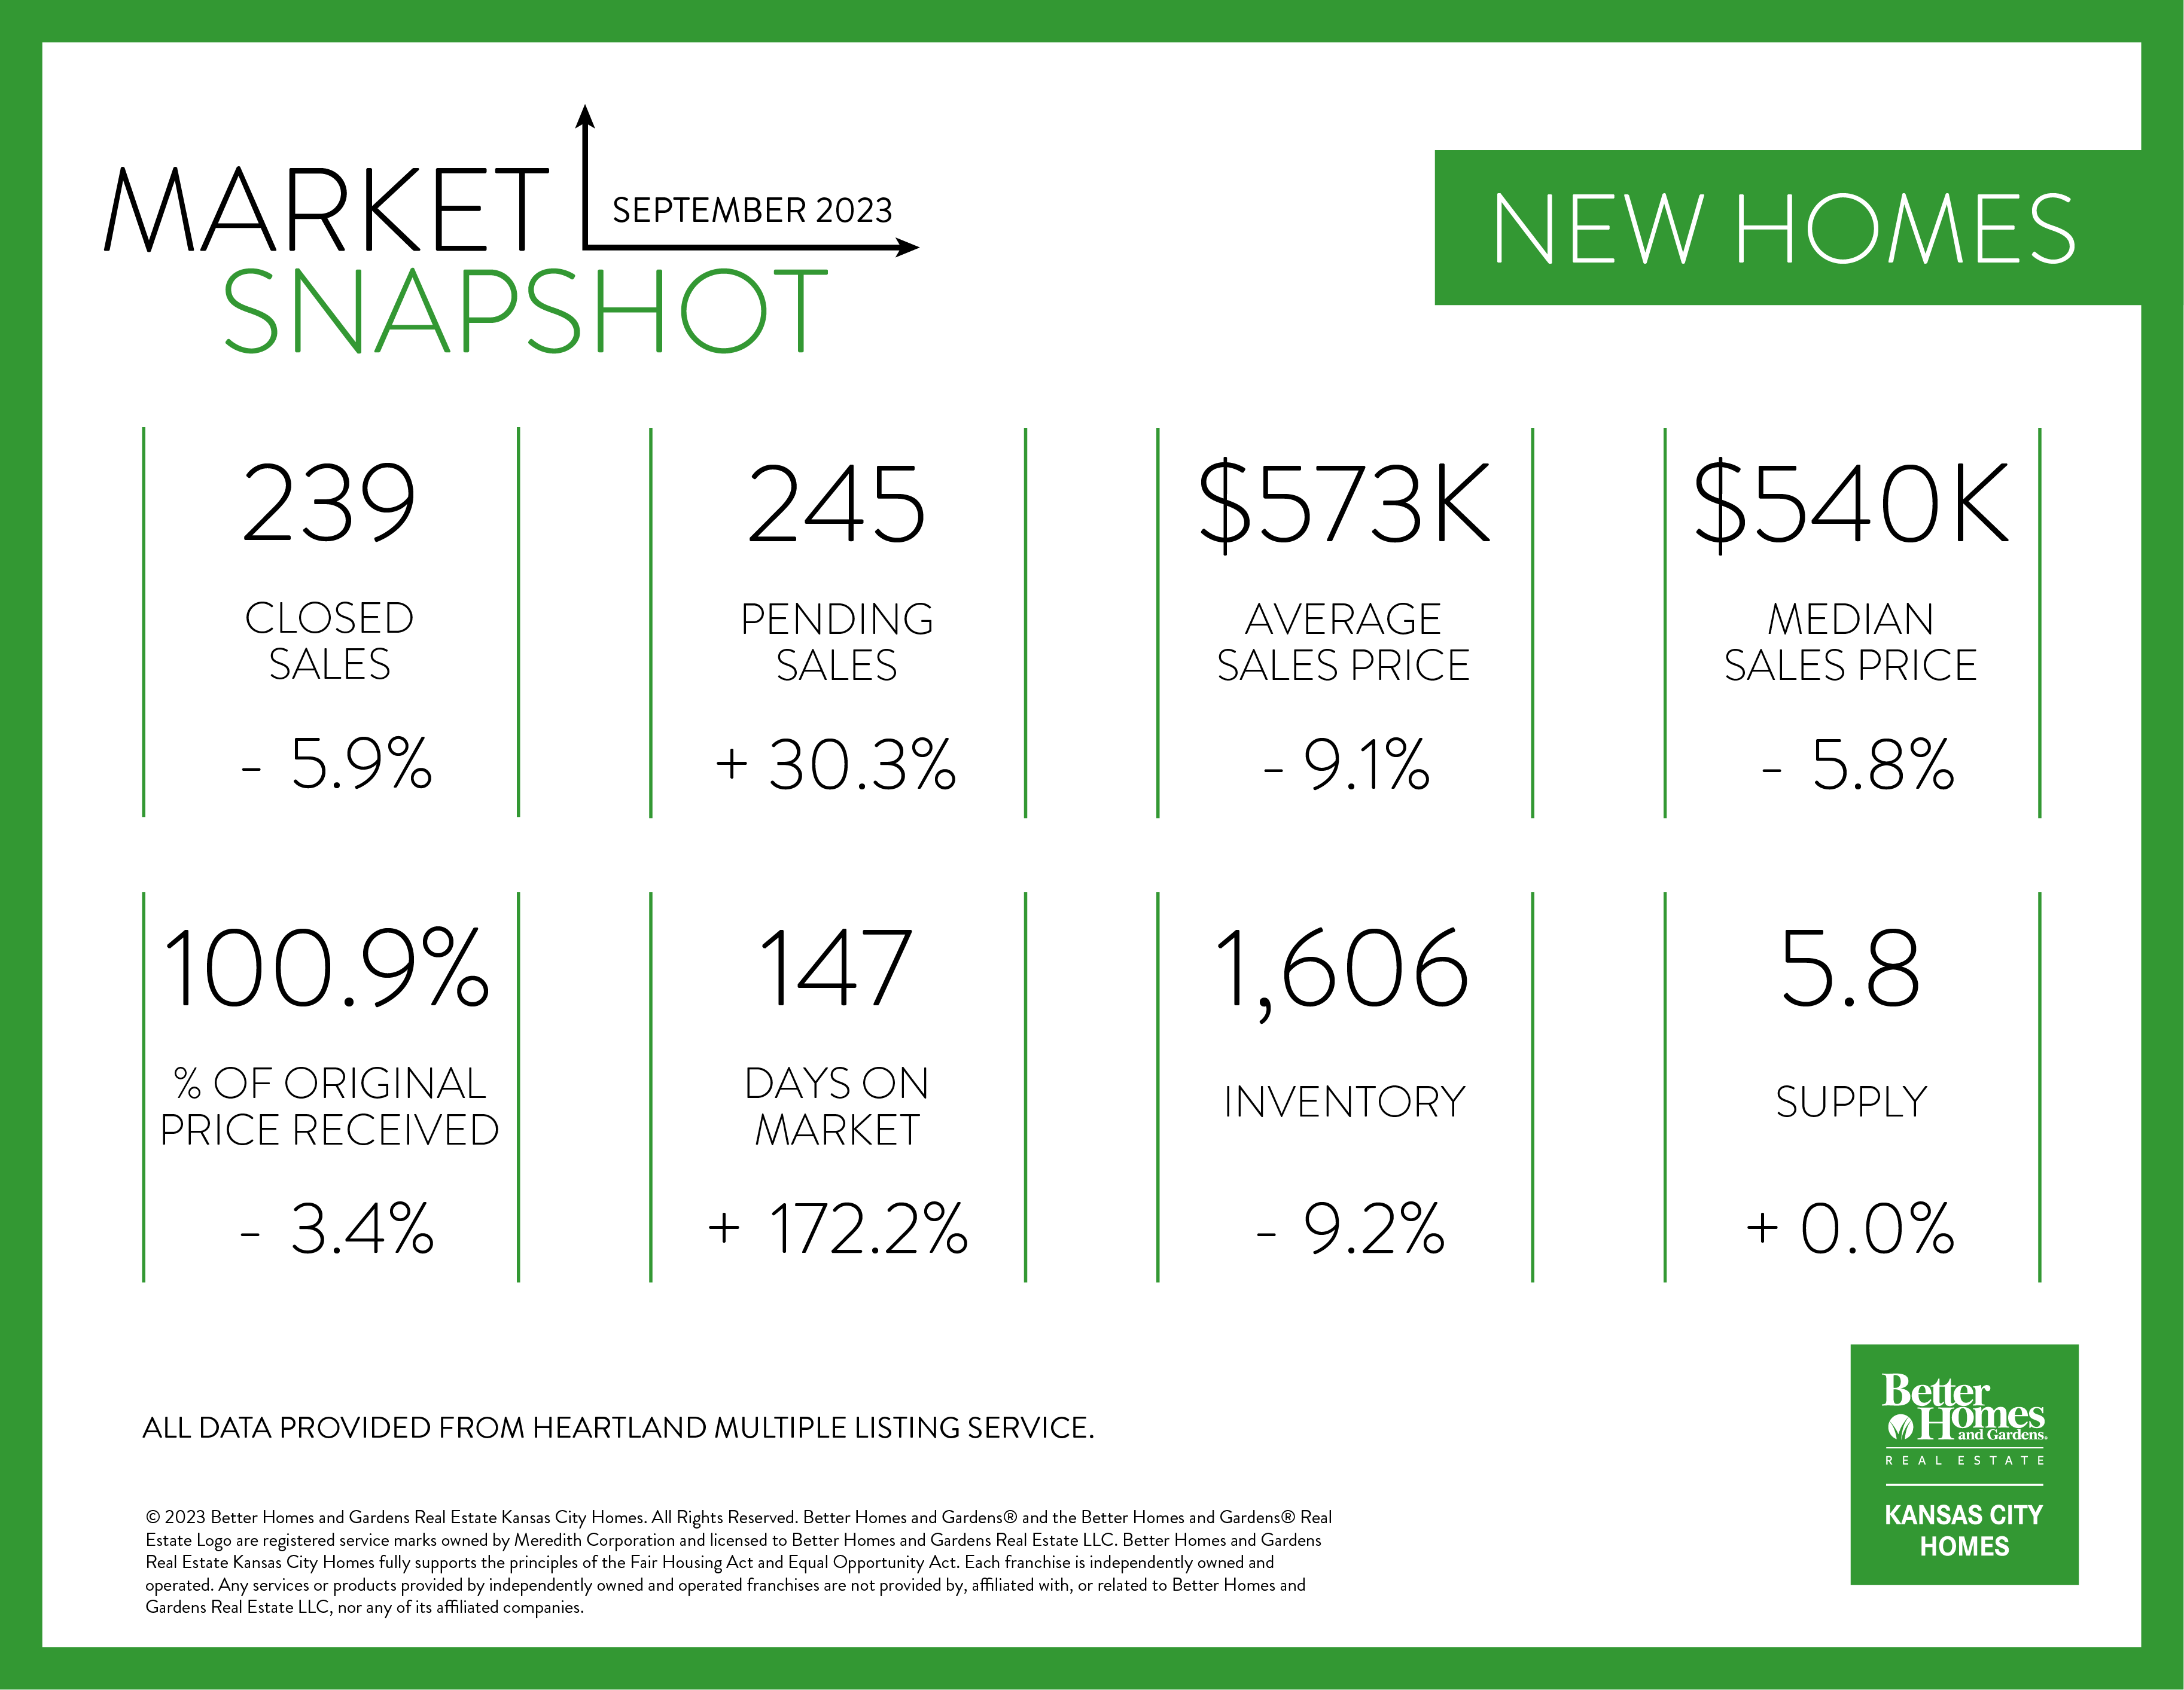 Sep 2023 New Homes Graphic